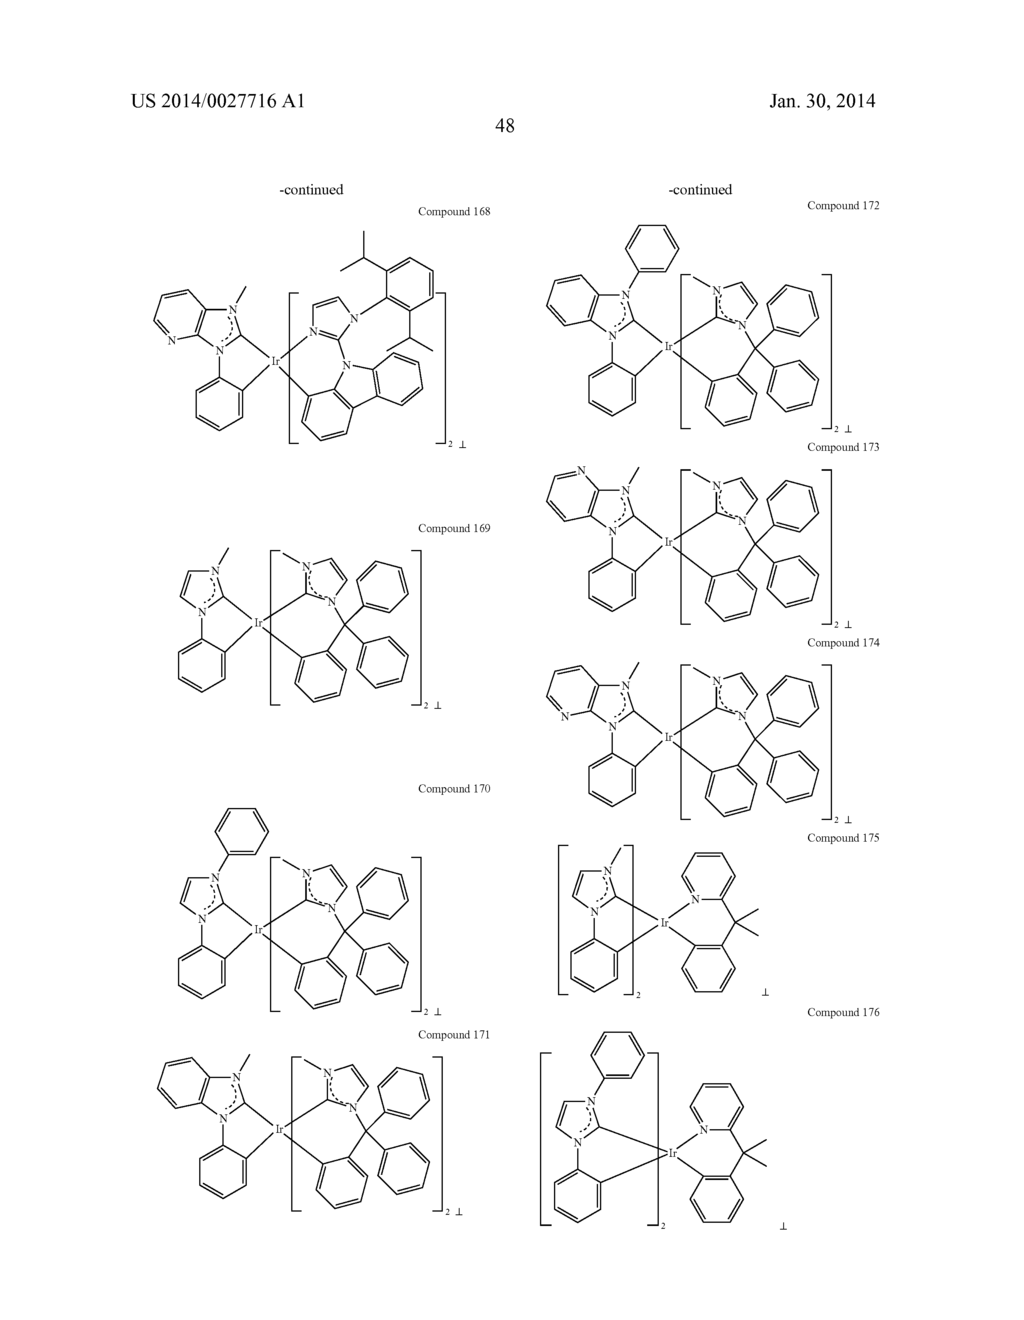 HETEROLEPTIC CYCLOMETALLATED IR(III) COMPLEXES HAVING A CYCLOMETALLATED     6-MEMBERED RING - diagram, schematic, and image 53